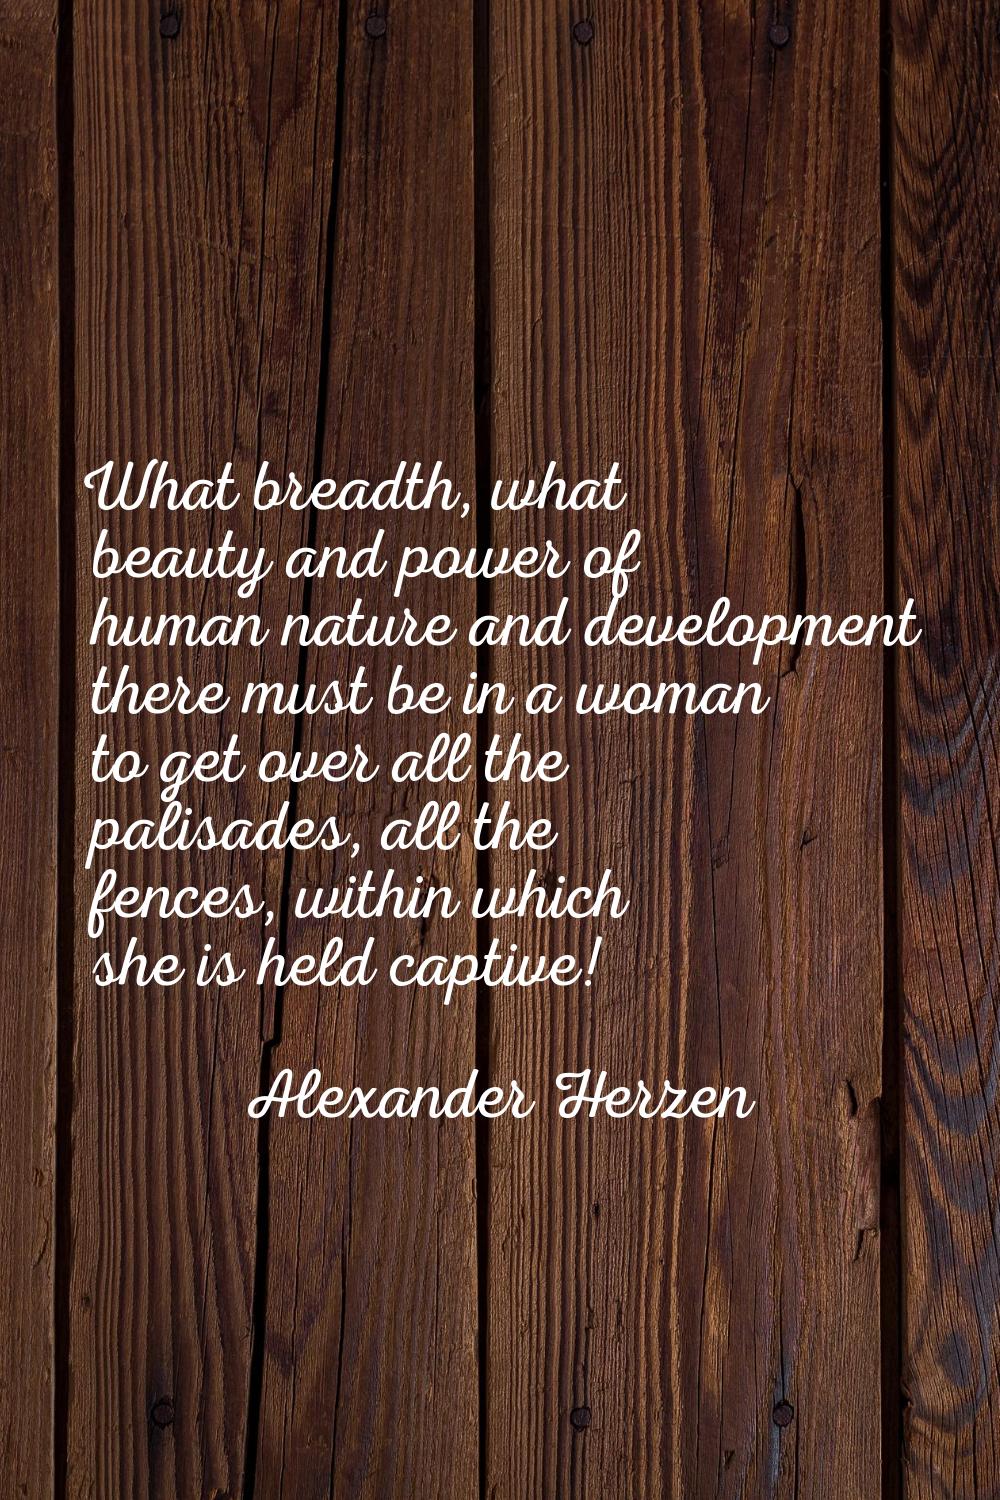 What breadth, what beauty and power of human nature and development there must be in a woman to get